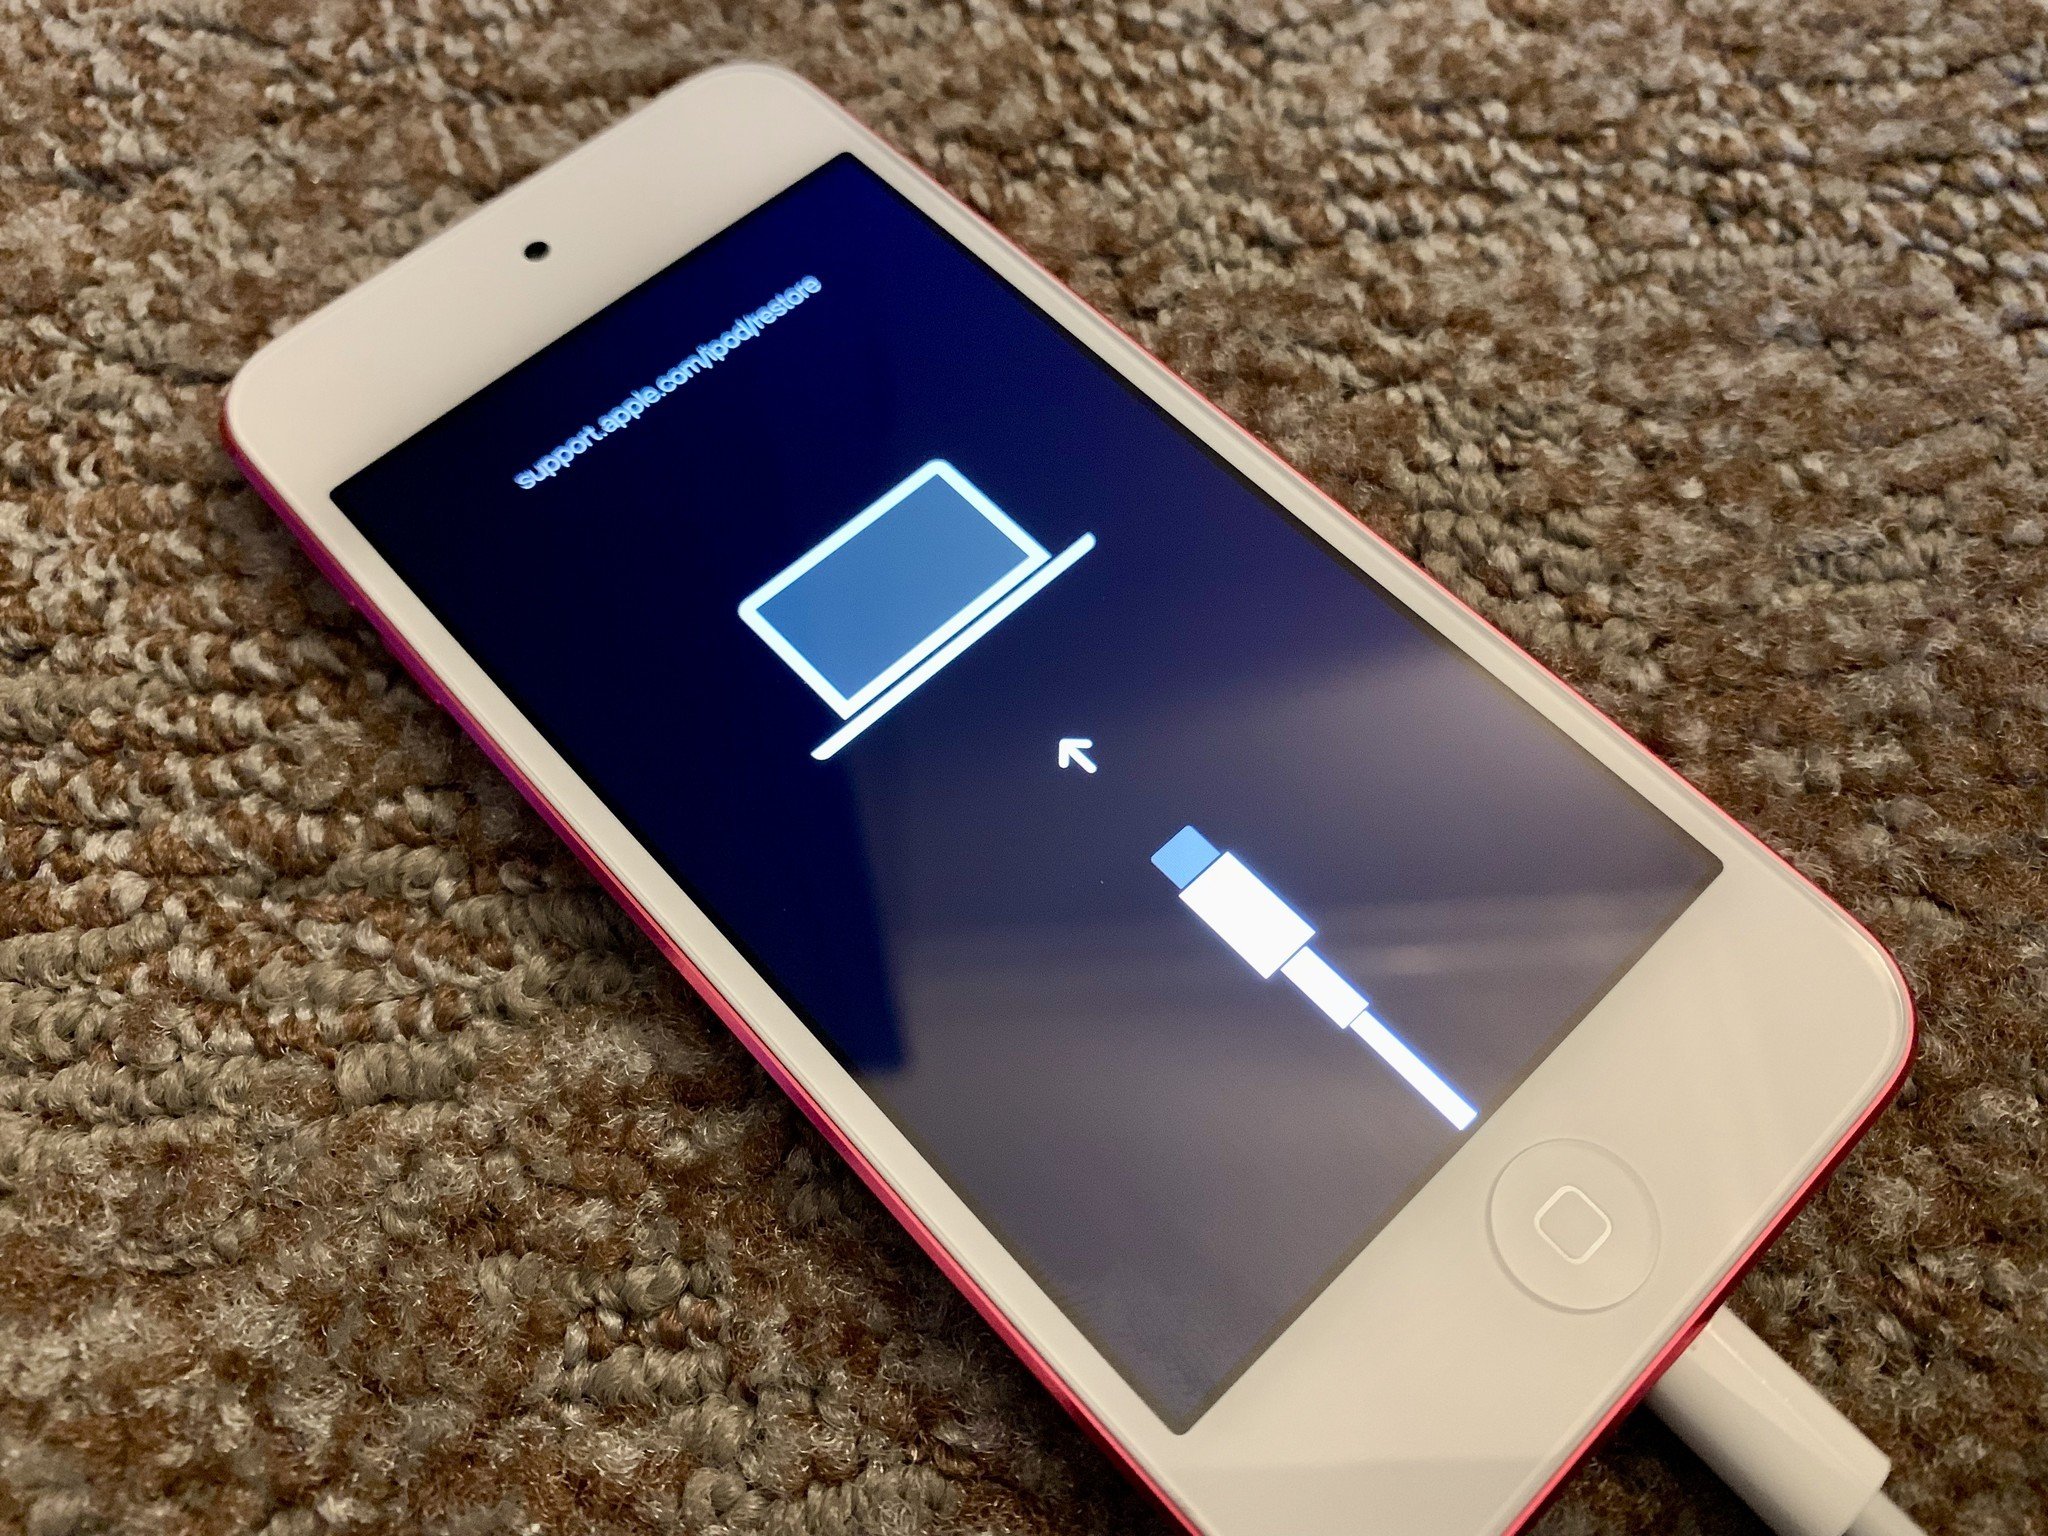 iPod touch in Recovery mode